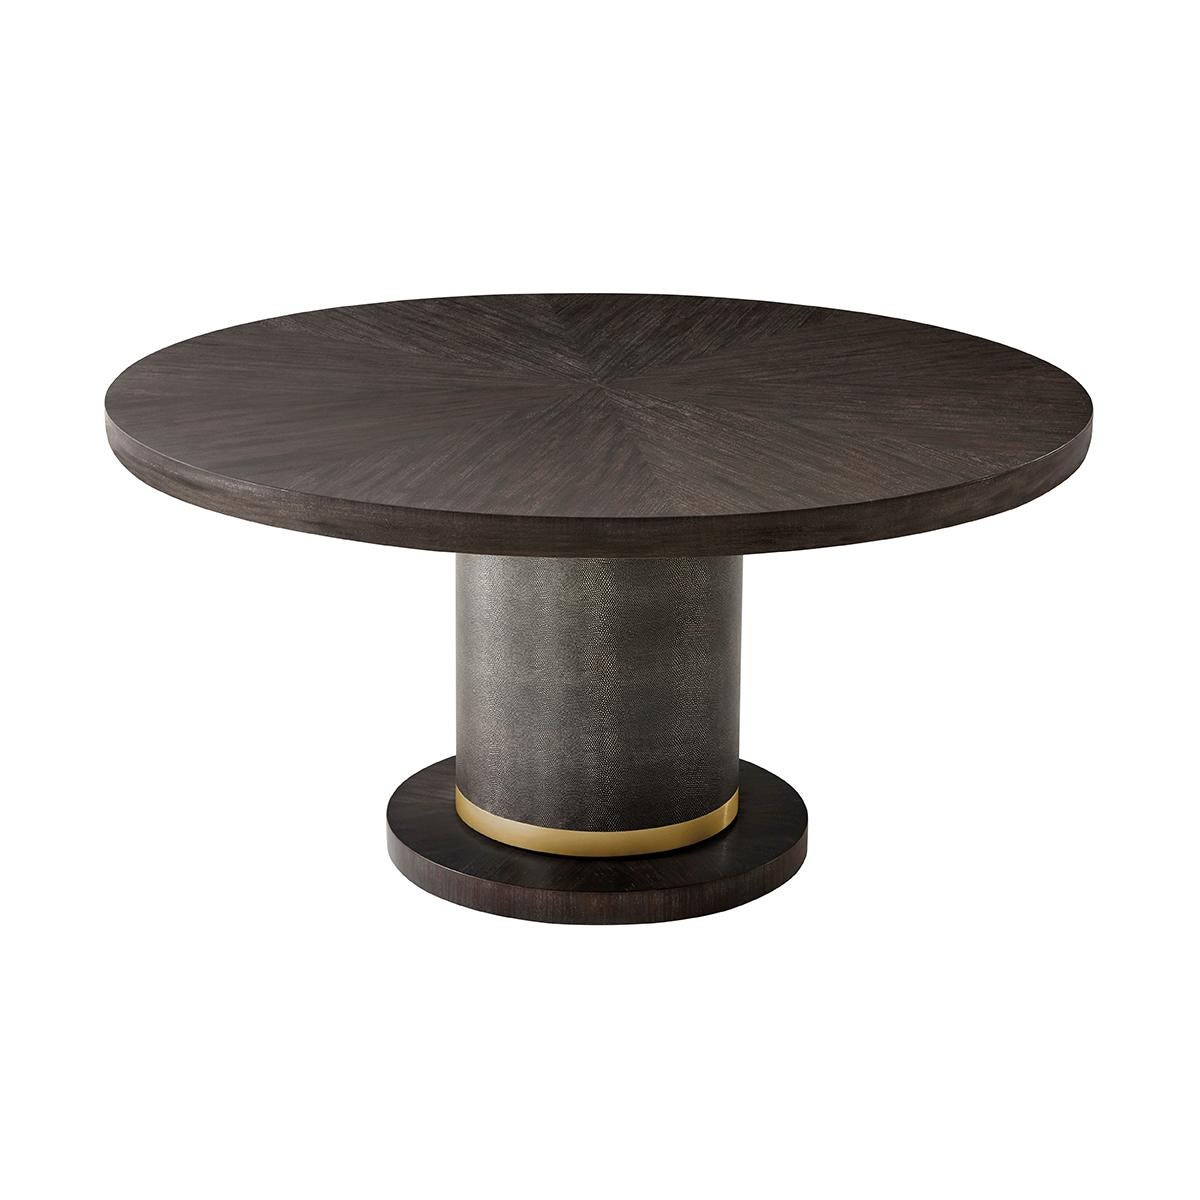 Mid Century Style 60 Round Dining Table - Dark In New Condition For Sale In Westwood, NJ